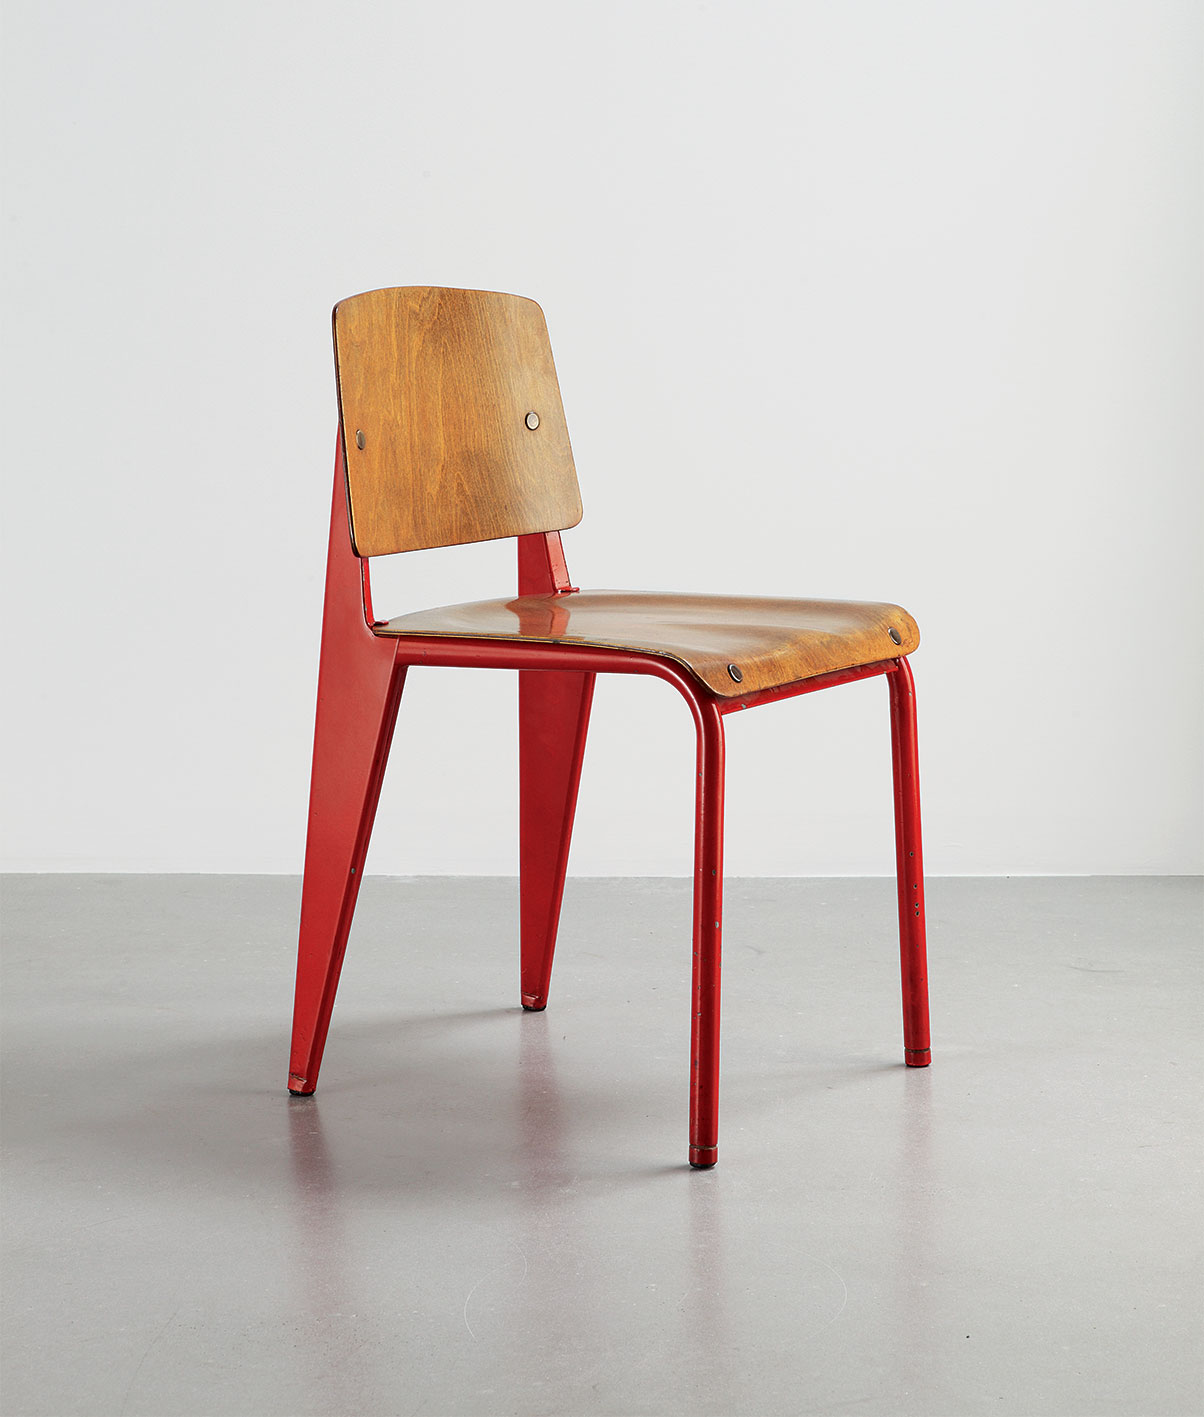 Chair no. 4, seat and backrest in molded plywood, 1934.